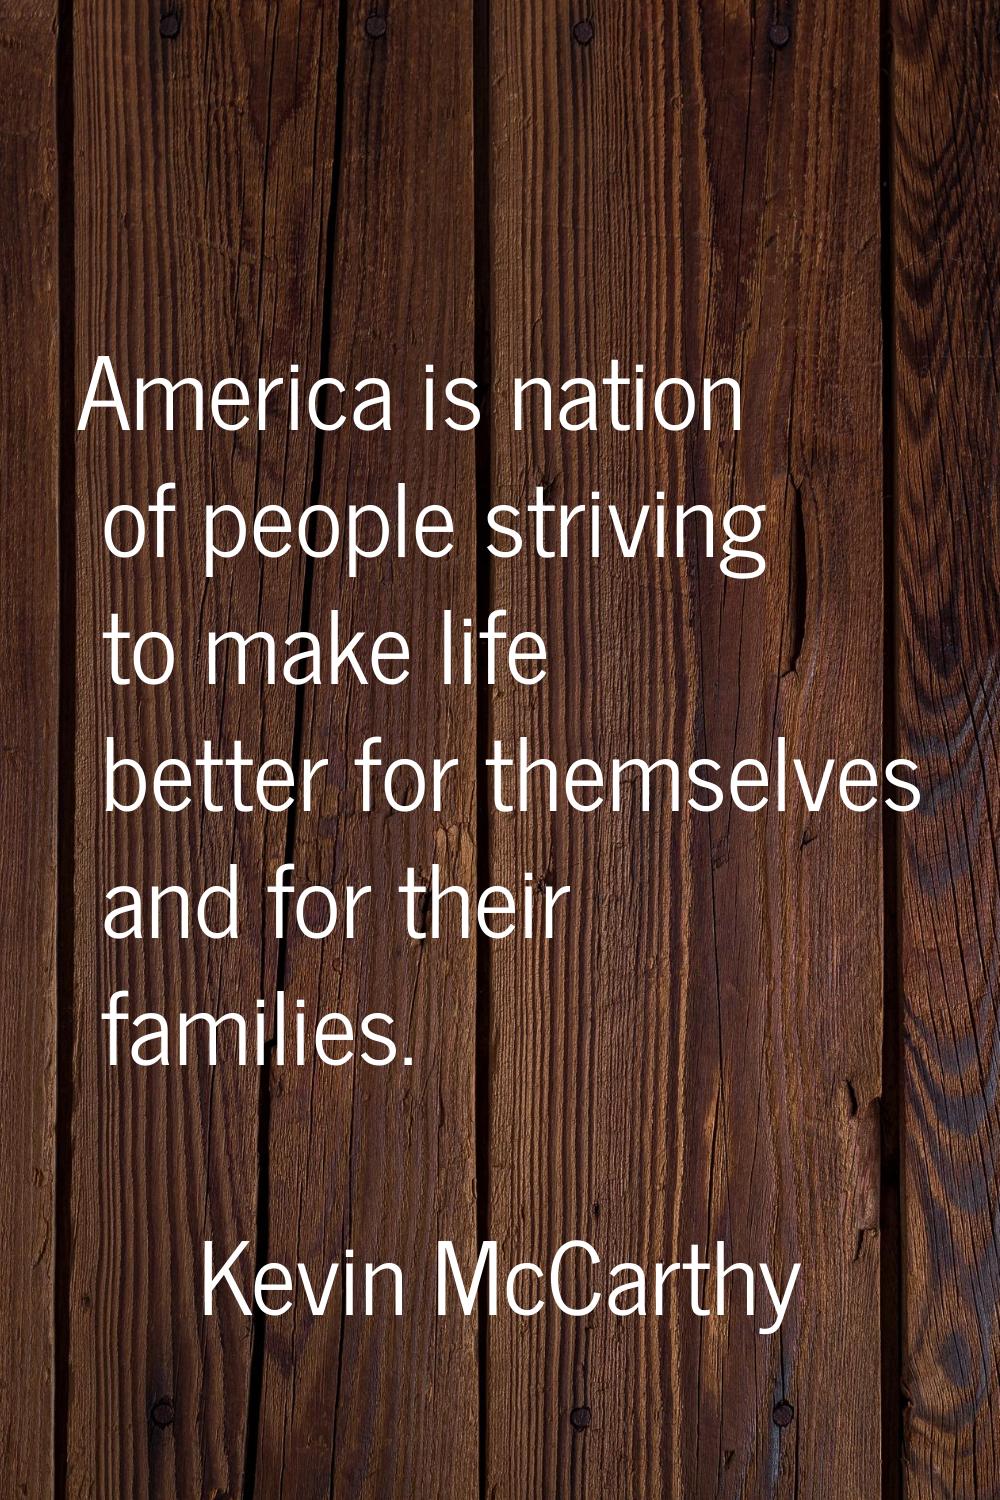 America is nation of people striving to make life better for themselves and for their families.